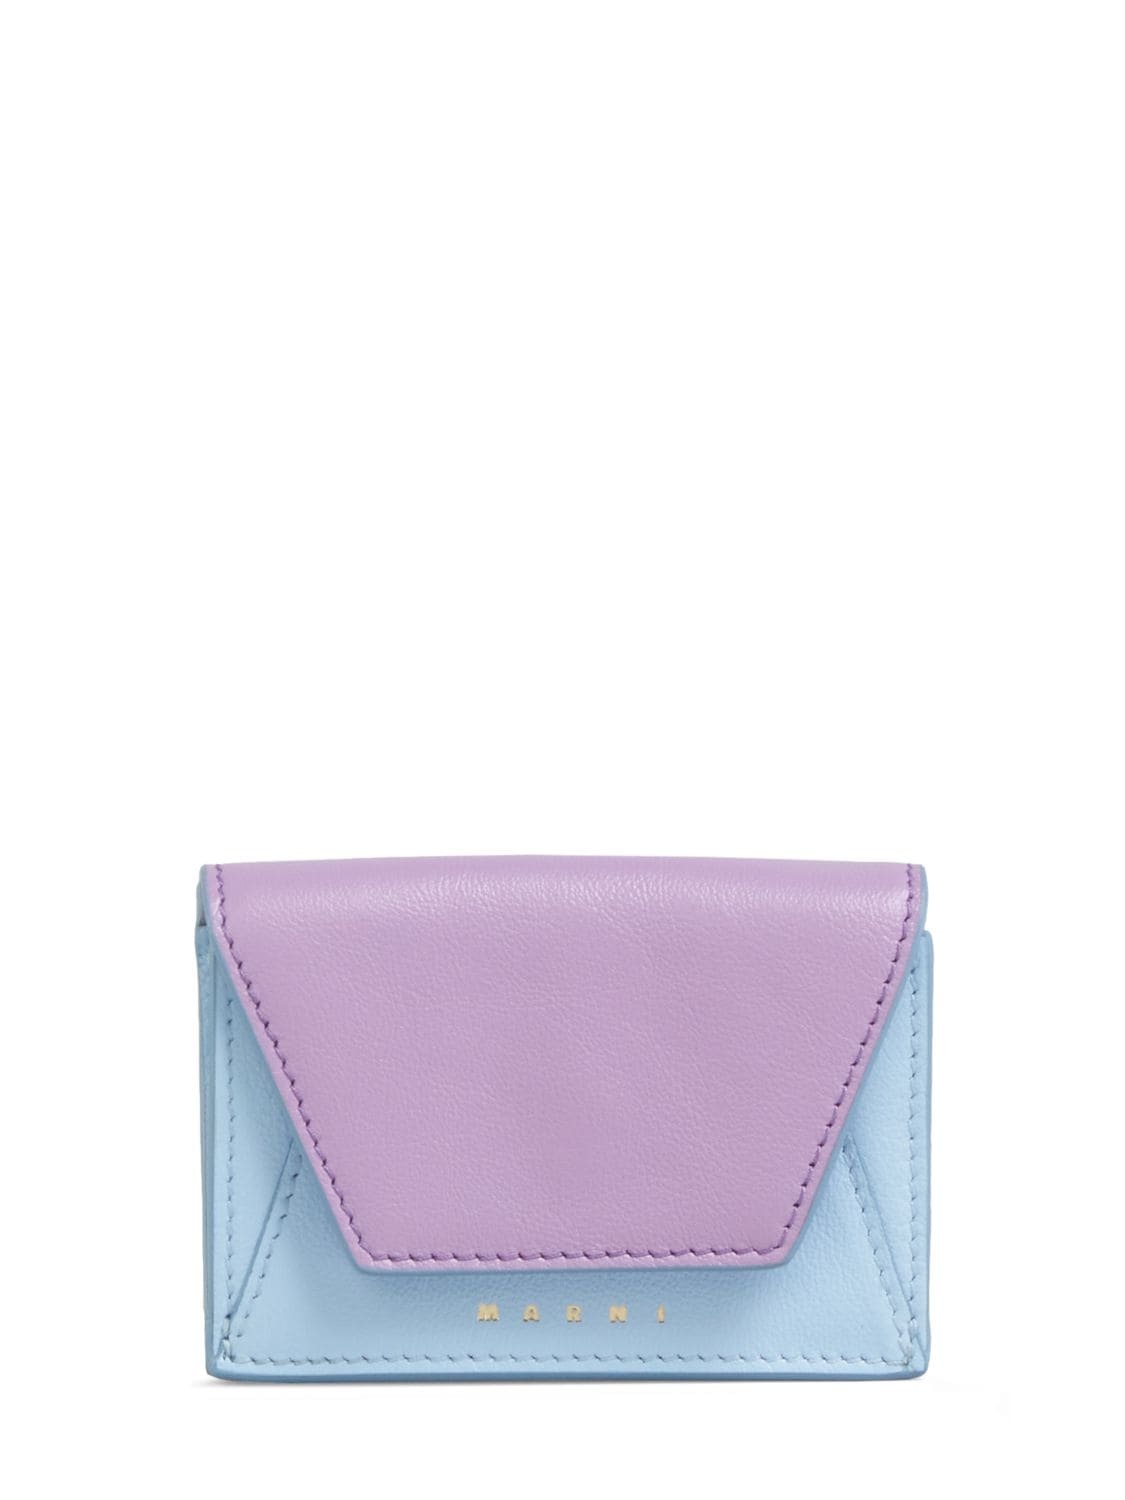 MARNI Trifold Wallet in blue